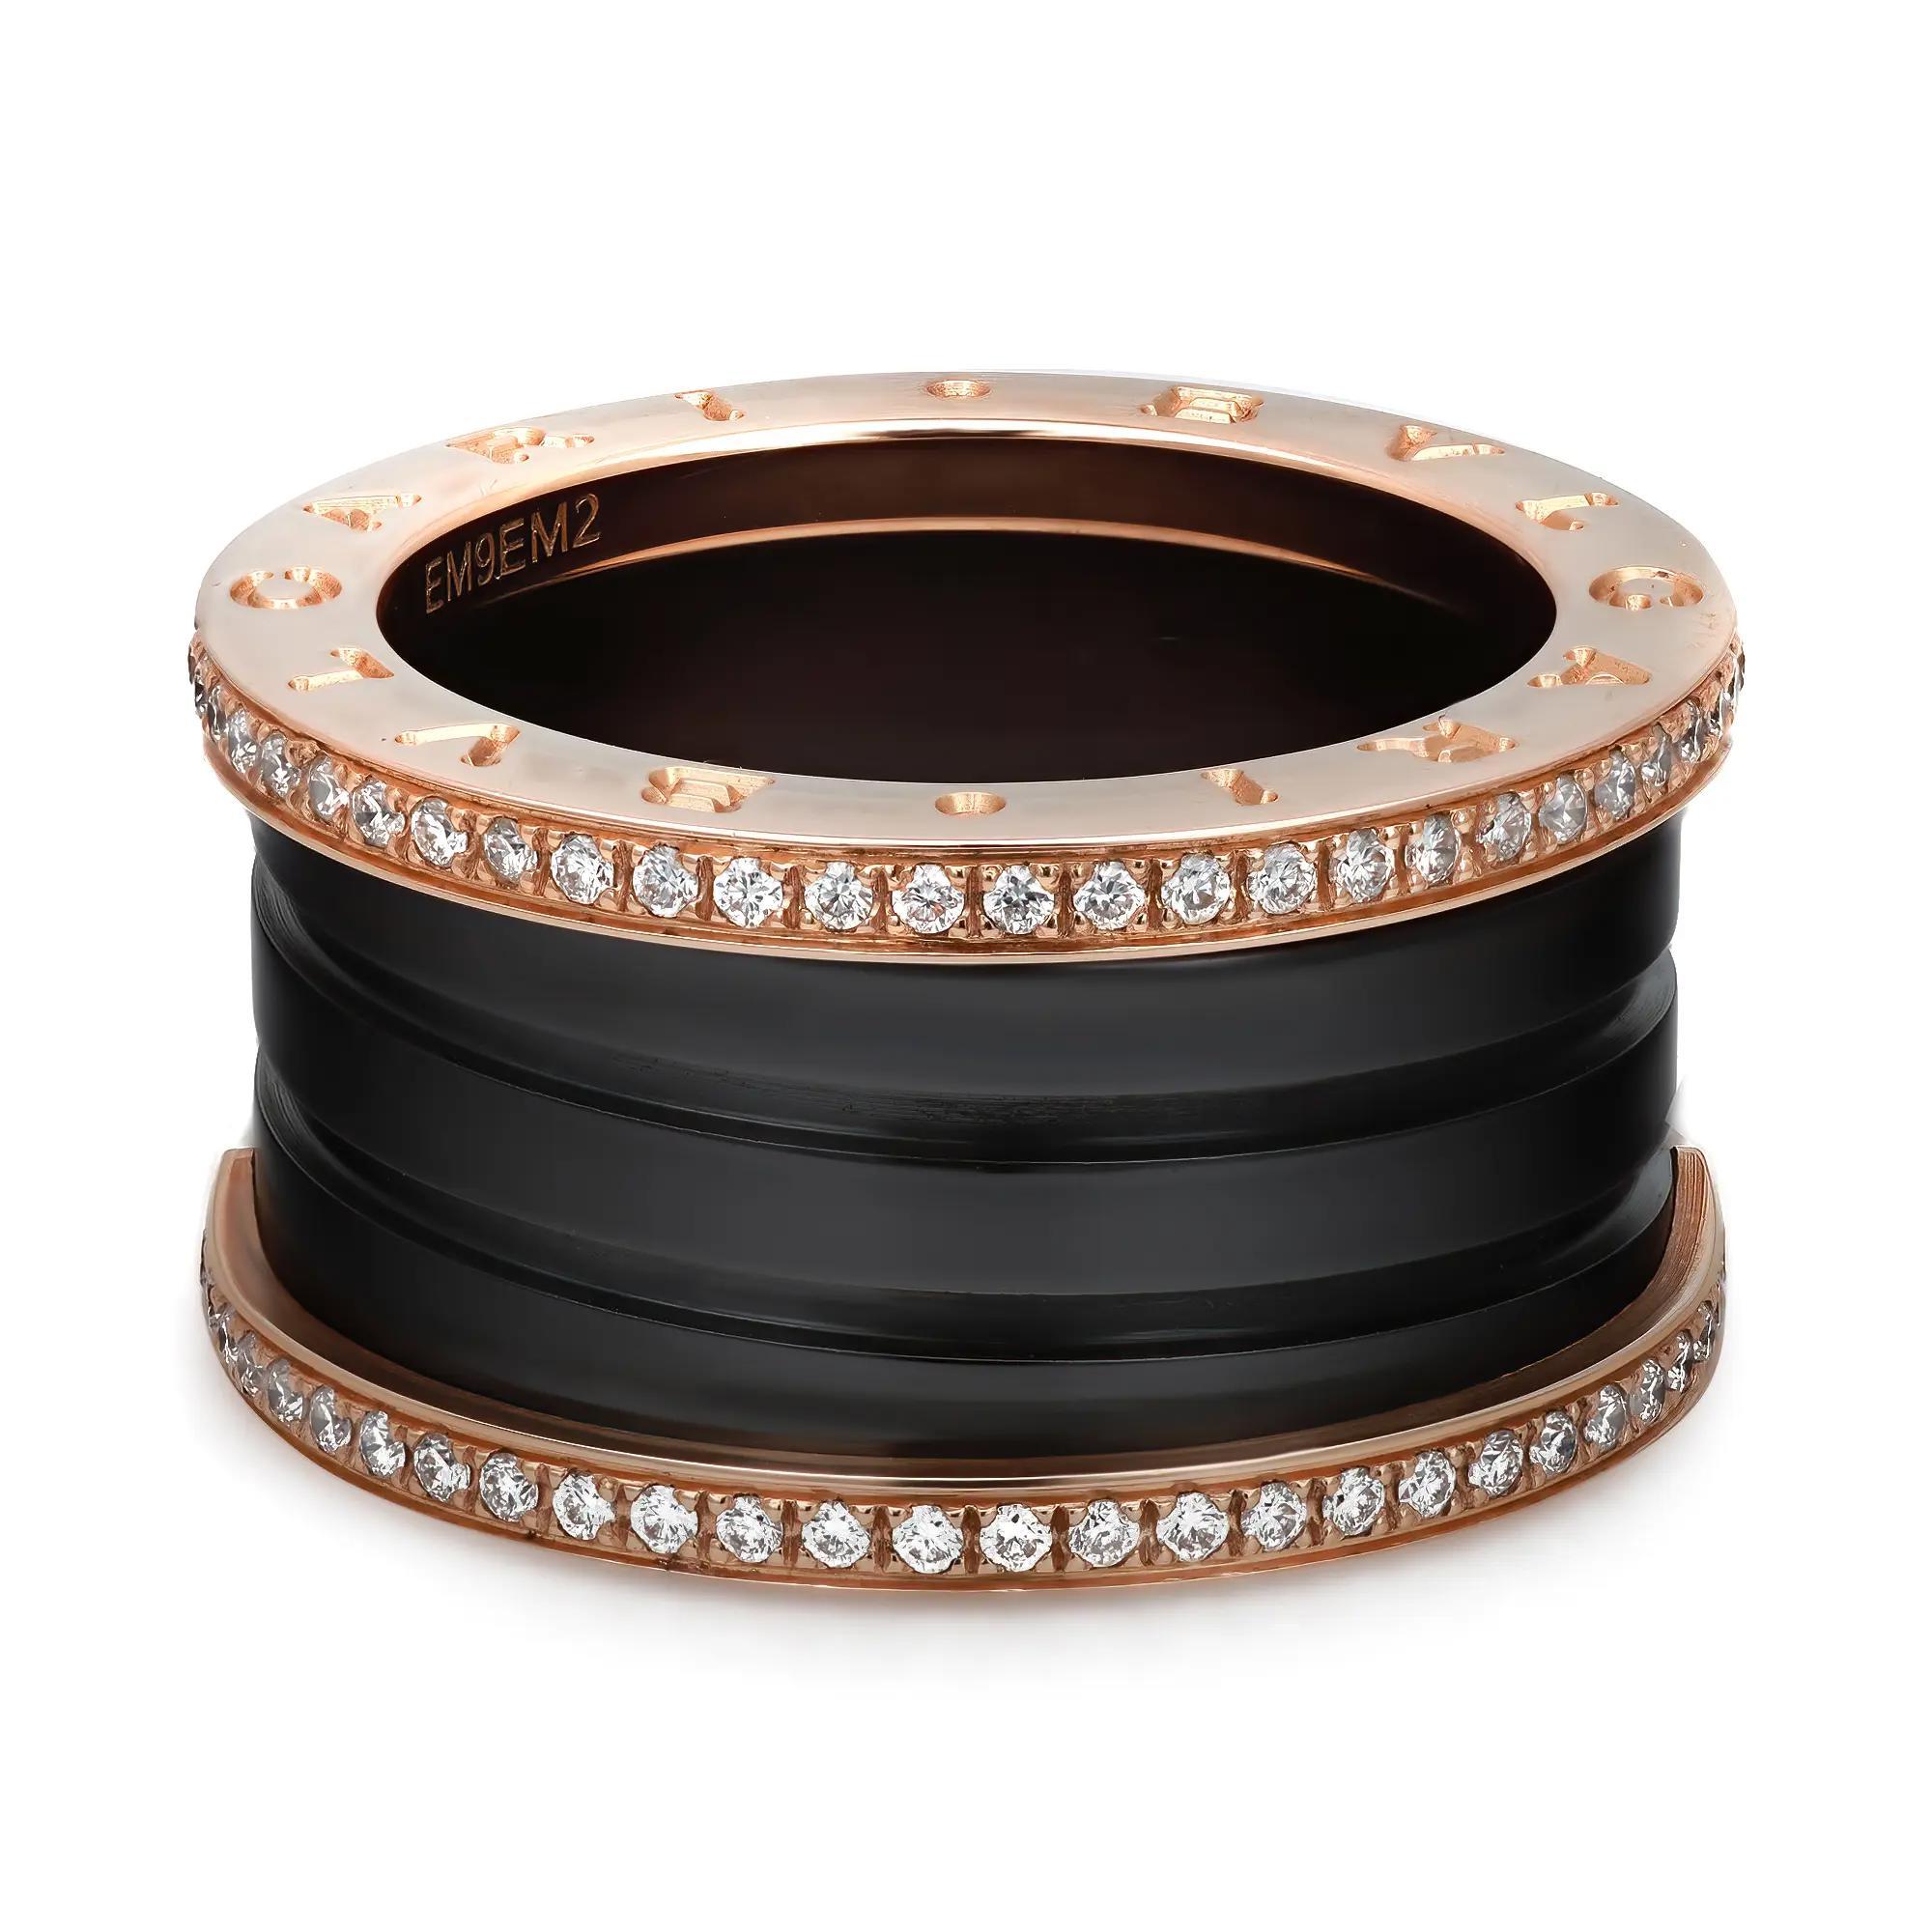 From the Bvlgari B.zero1 collection, this beautiful four-band ring is crafted in a lustrous 18K rose gold. It features a distinctive four-band spiral ring with black ceramic and pavé set round brilliant cut diamonds on the rims with the BVLGARI logo